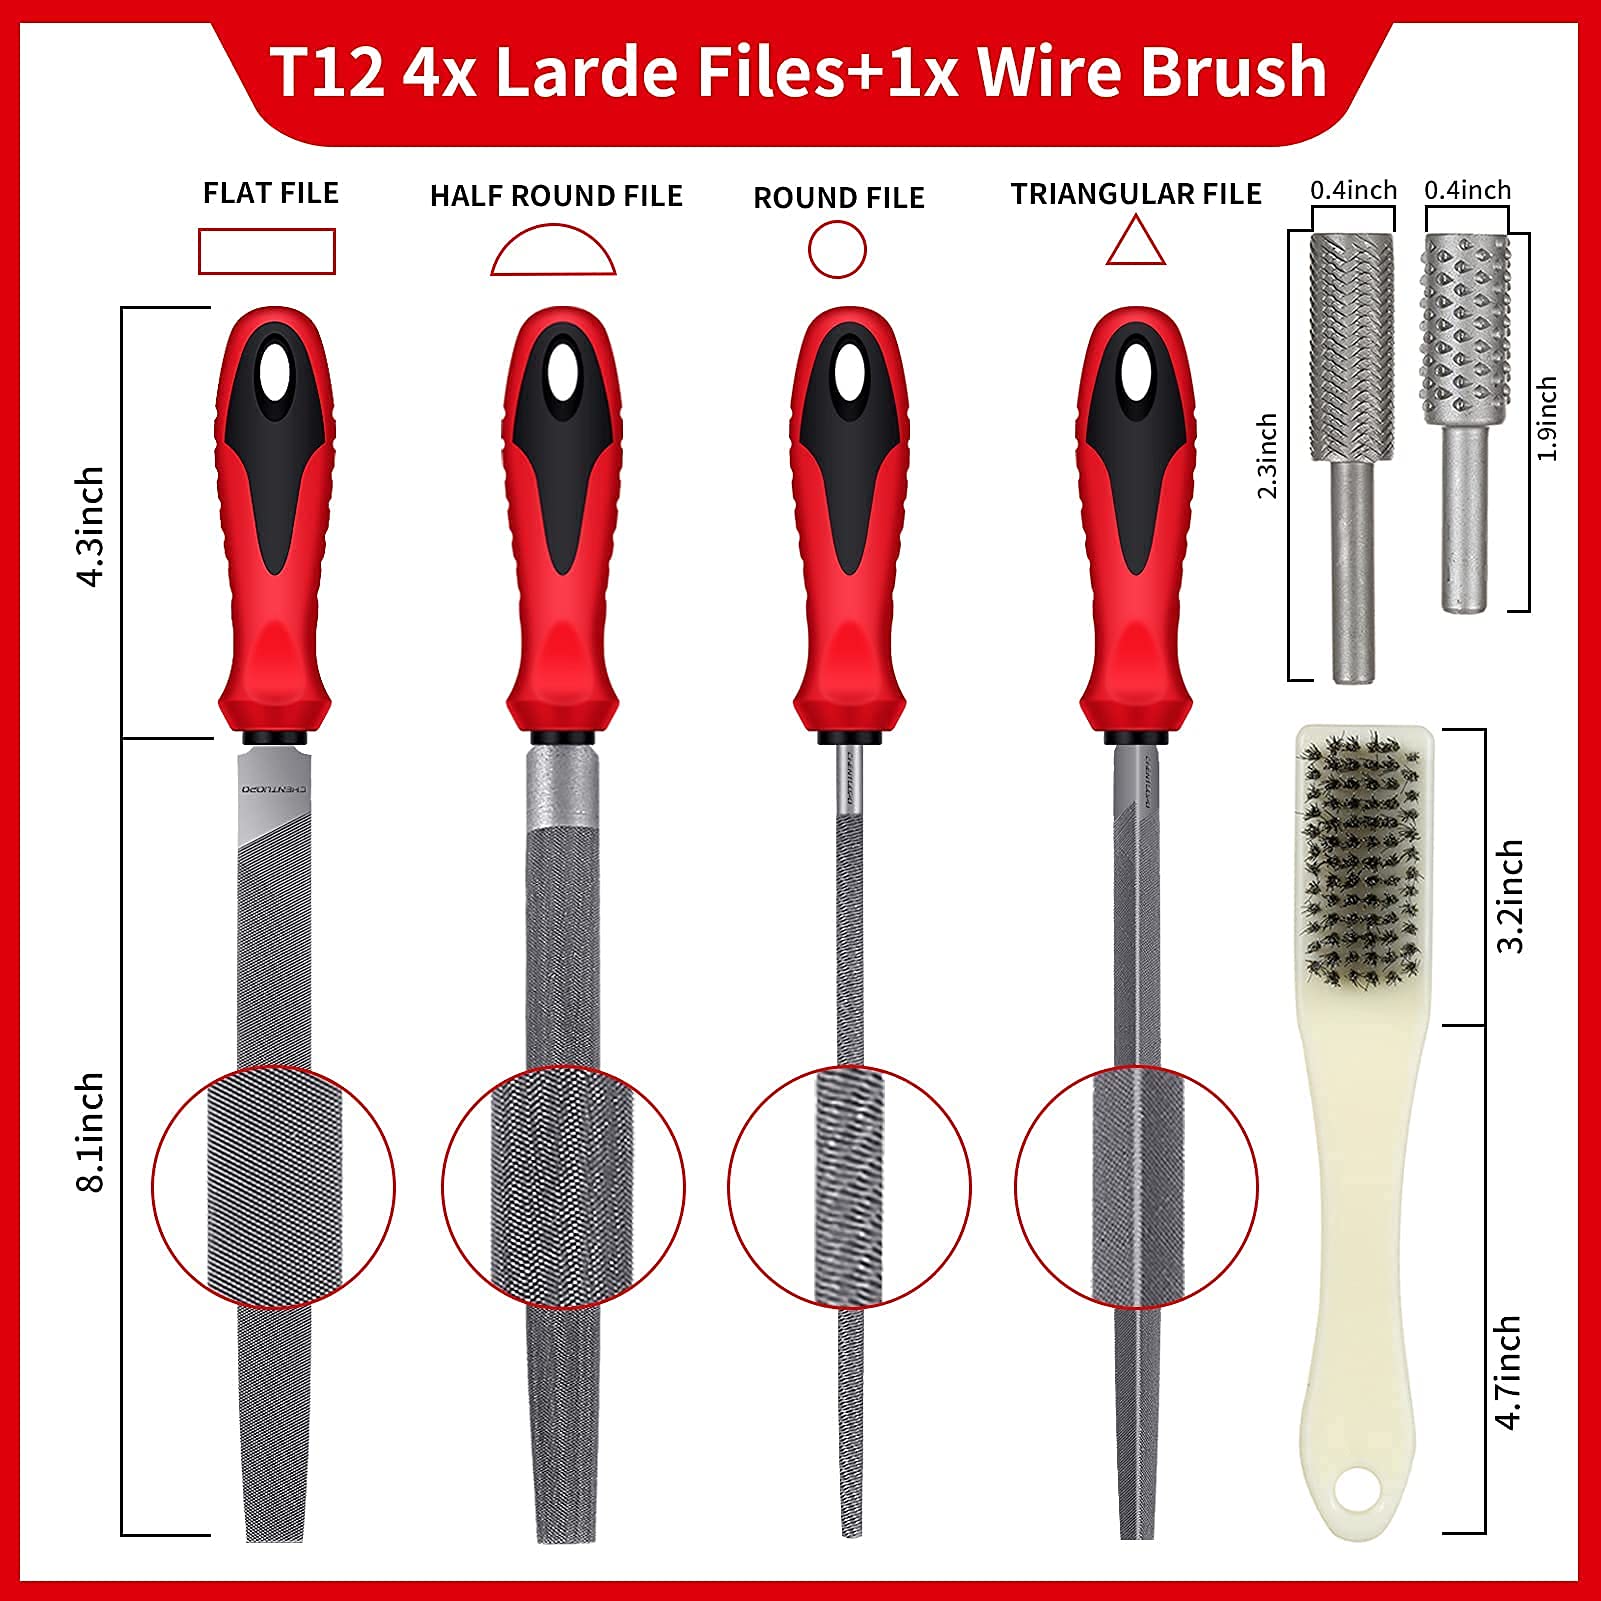 57Pcs Metal & Wood File Rasp Set,Grade T12 Forged Alloy Steel, Half-round/Round/Triangle/Flat 4pcs Large Tools, 14pcs Needle Files and a pair of Electric Files, a brush and 36pcs emery papers